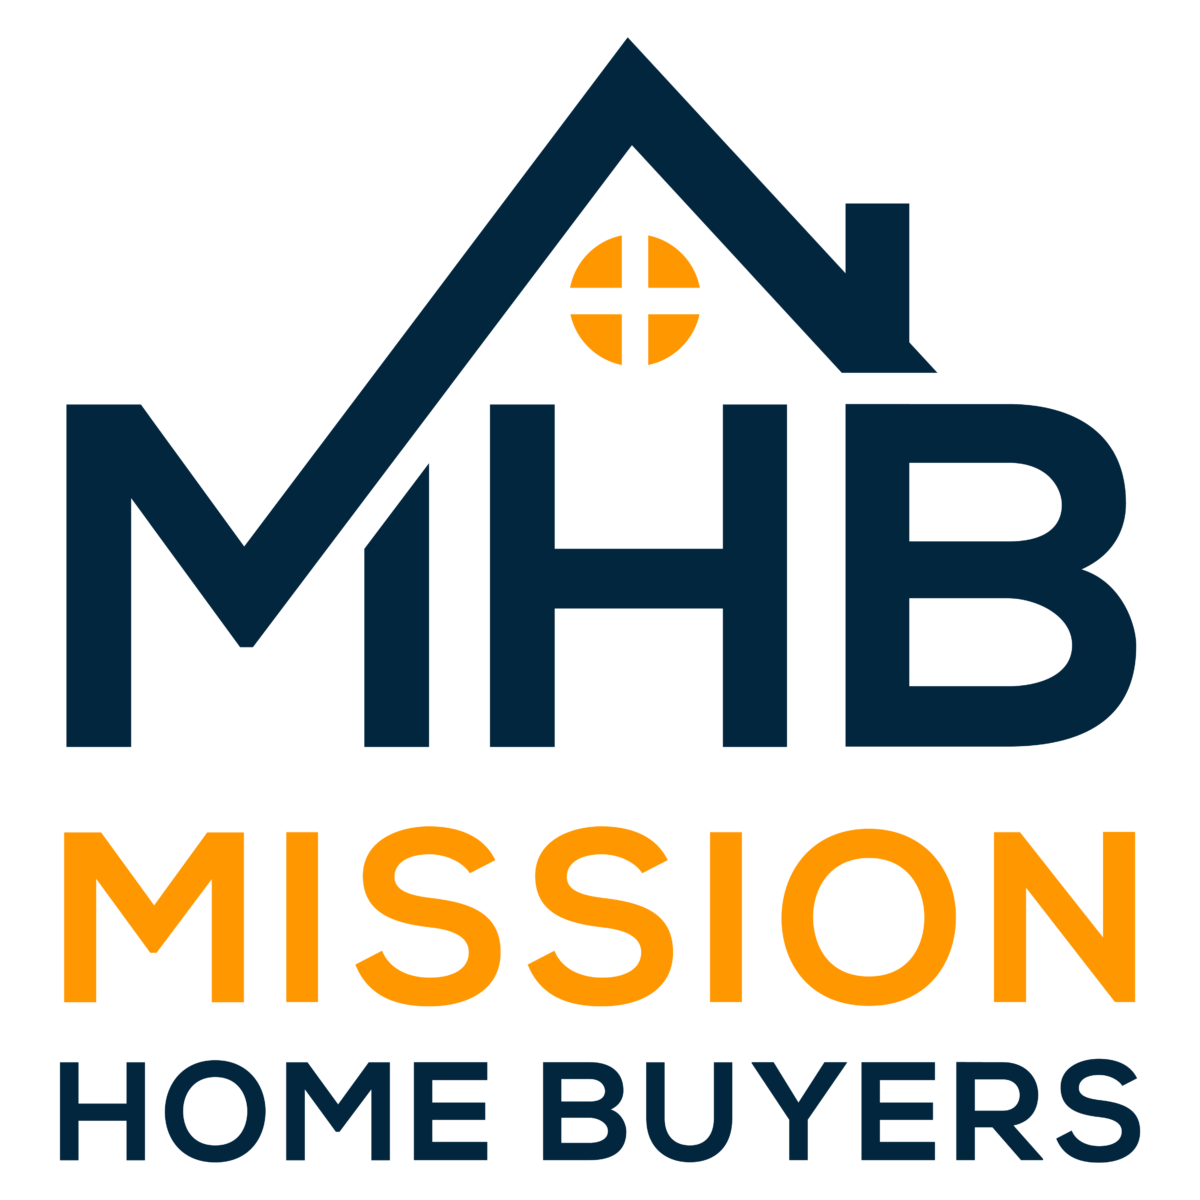 Mission Home Buyers logo